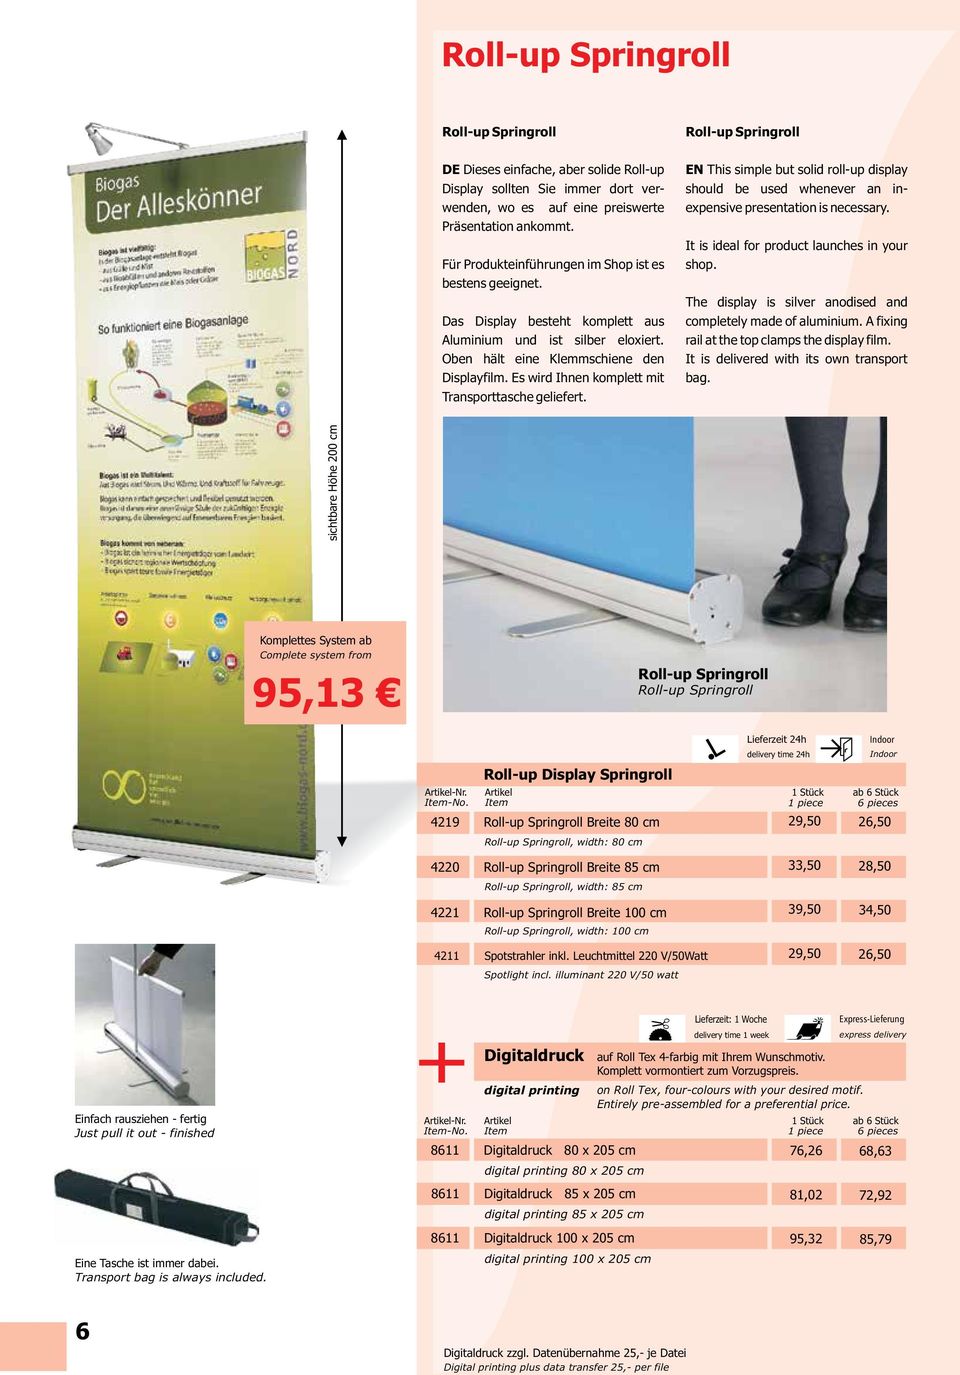 Es wird Ihnen komplett mit Transporttasche geliefert. Roll-up Springroll EN This simple but solid roll-up display should be used whenever an inexpensive presentation is necessary.